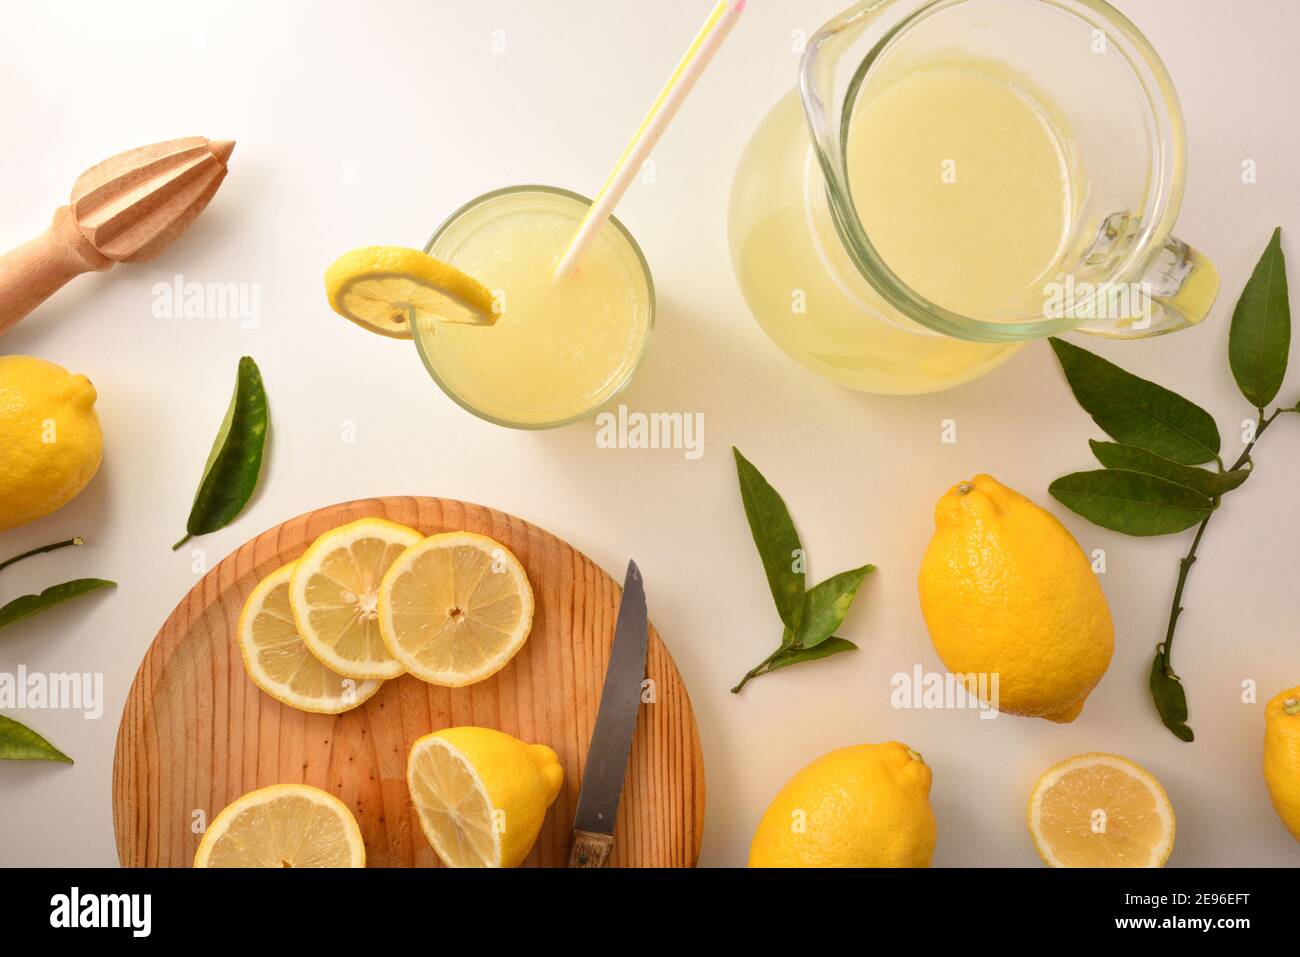 Freshly prepared lemon juice with utensils on the white kitchen bench. Top view. Horizontal composition. Stock Photo